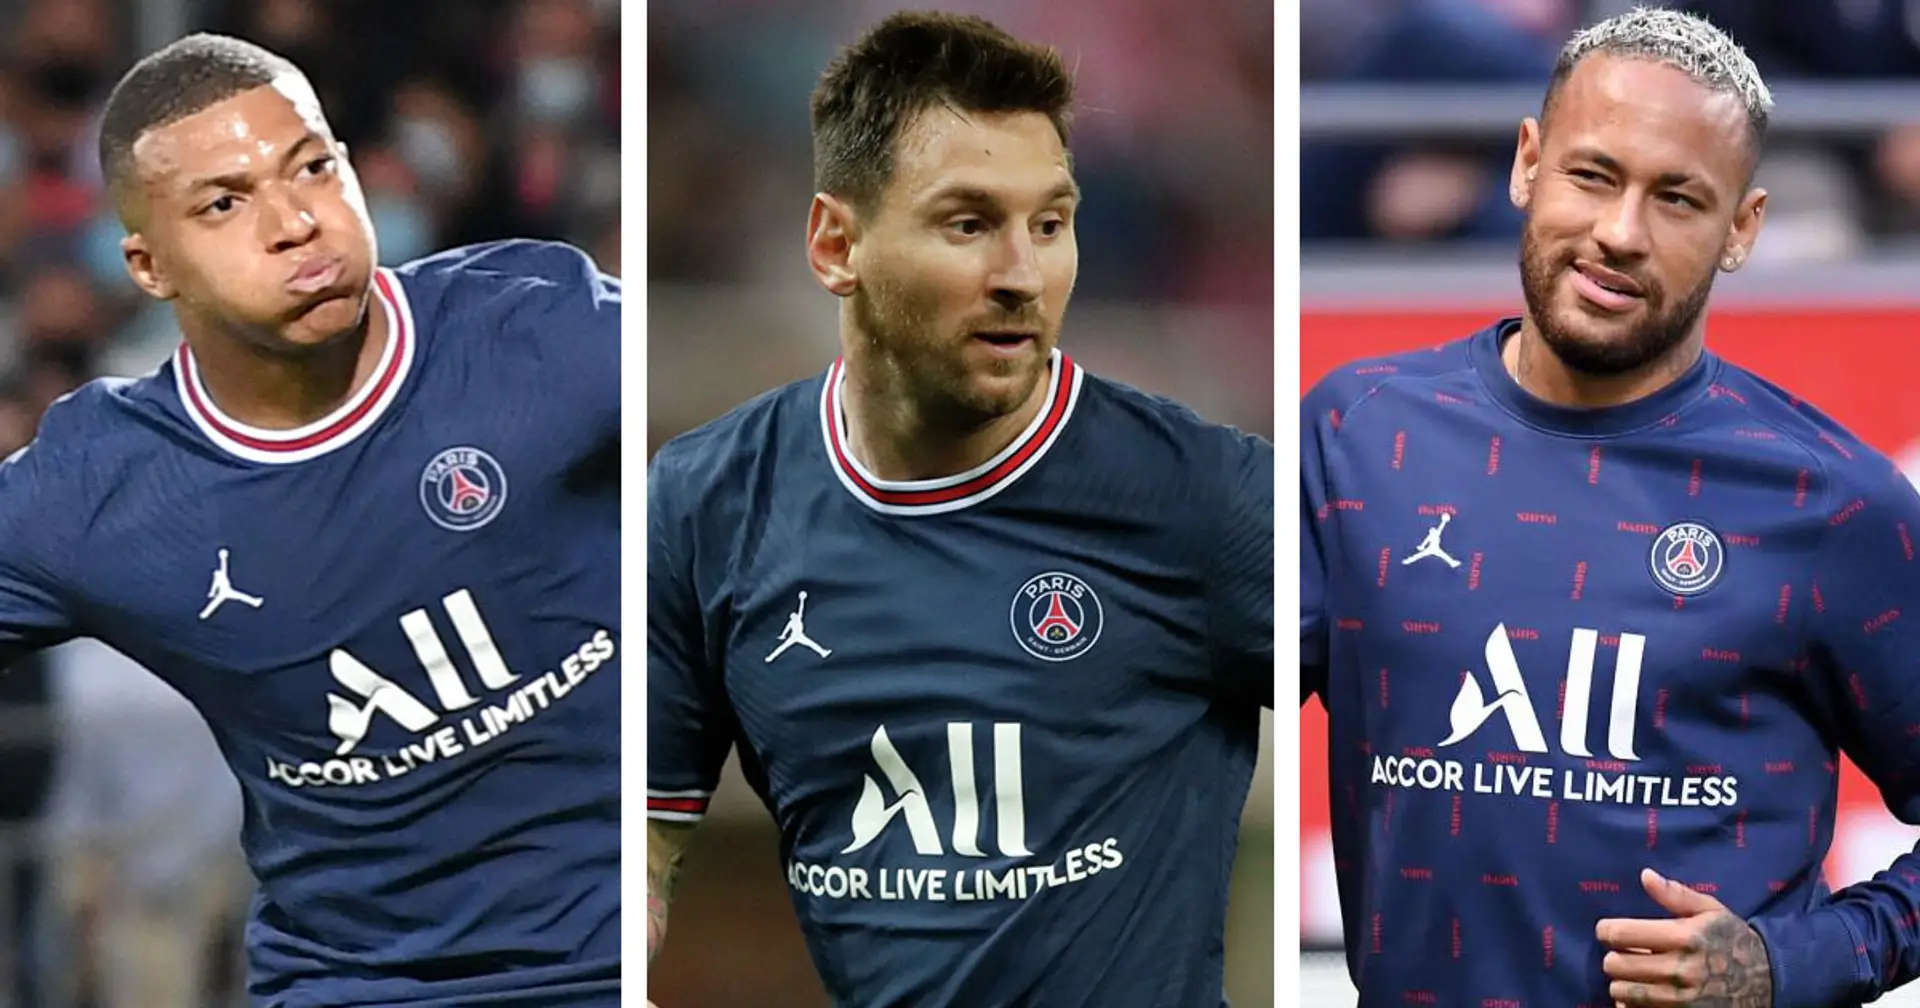 PSG's top 5 most expensive players revealed: new signings Messi and Donnarumma in